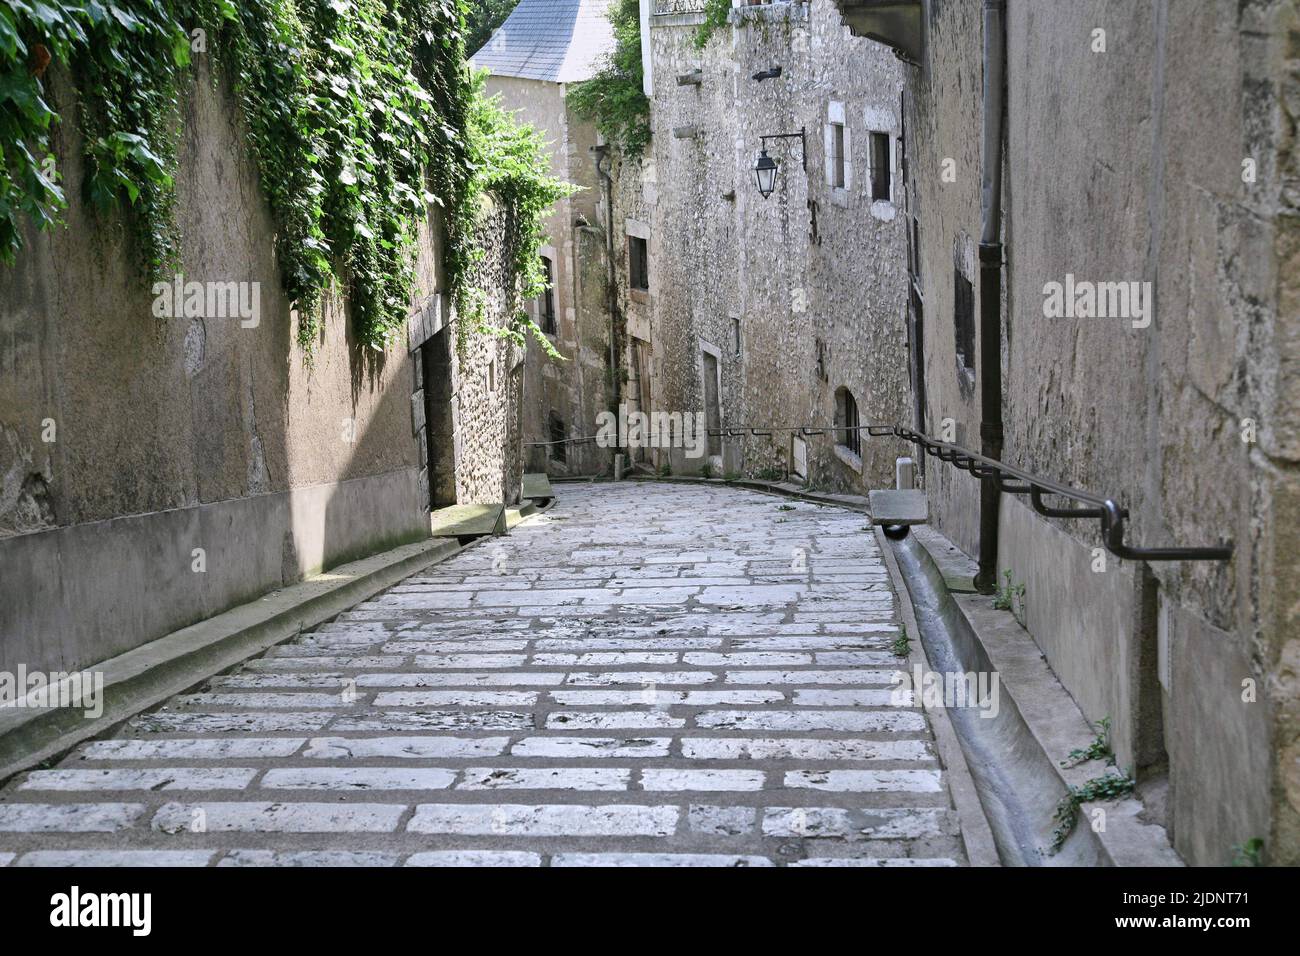 Narrow cobblestone street in the medieval city of Blois, France Stock Photo